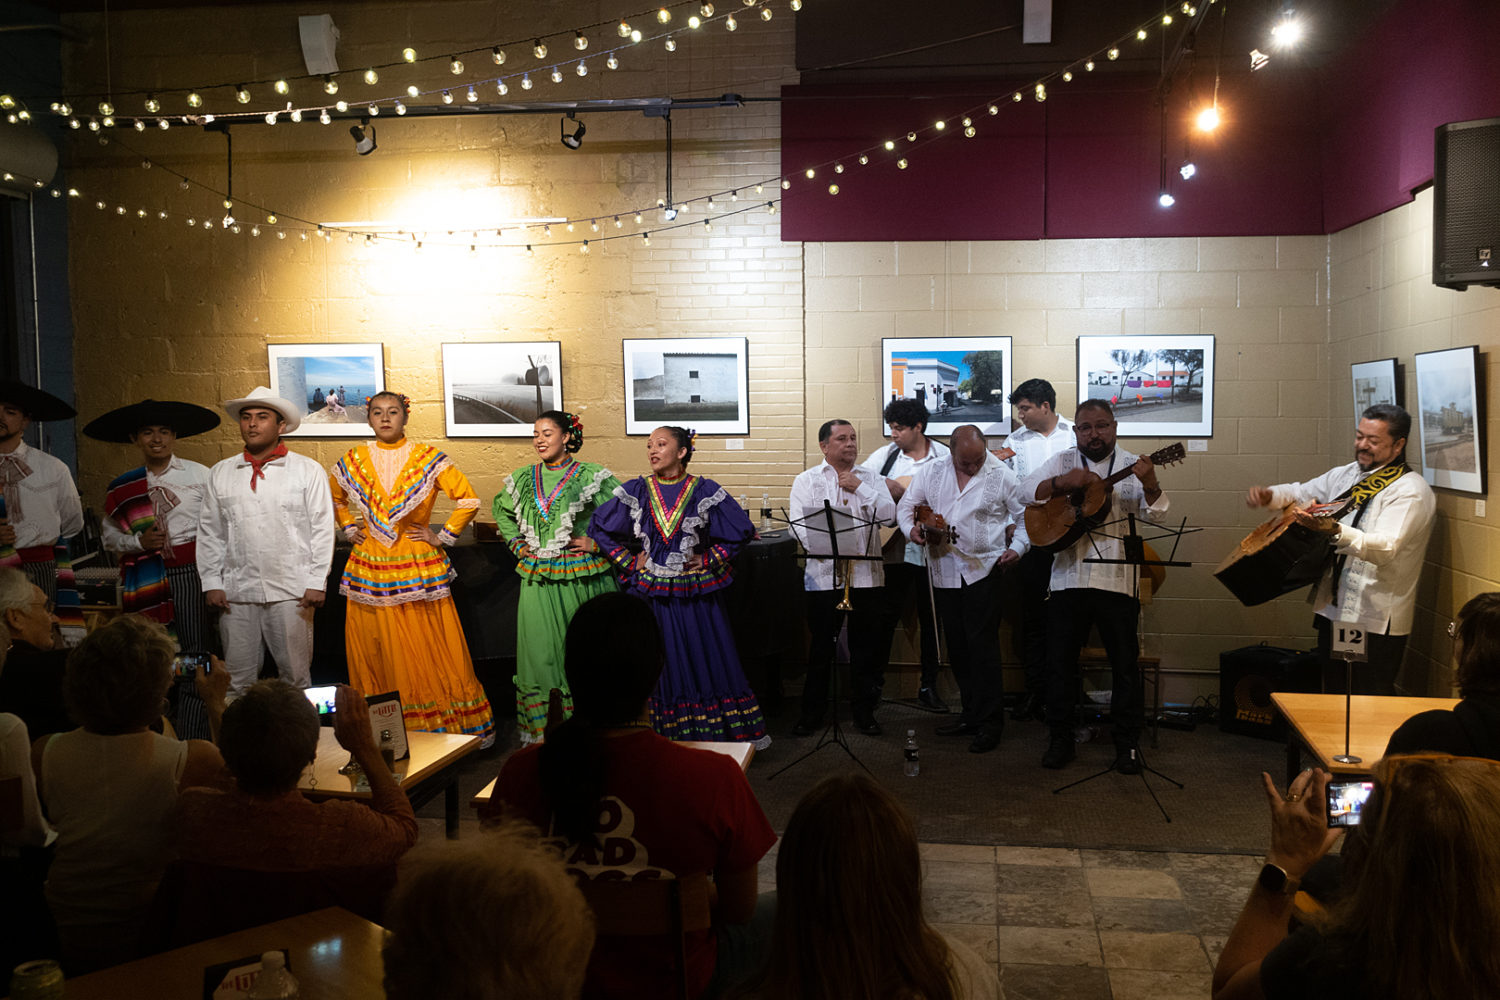 Ensemble Aztlan performing at the Little Theatre Café with Paul Dodd photos on the wall